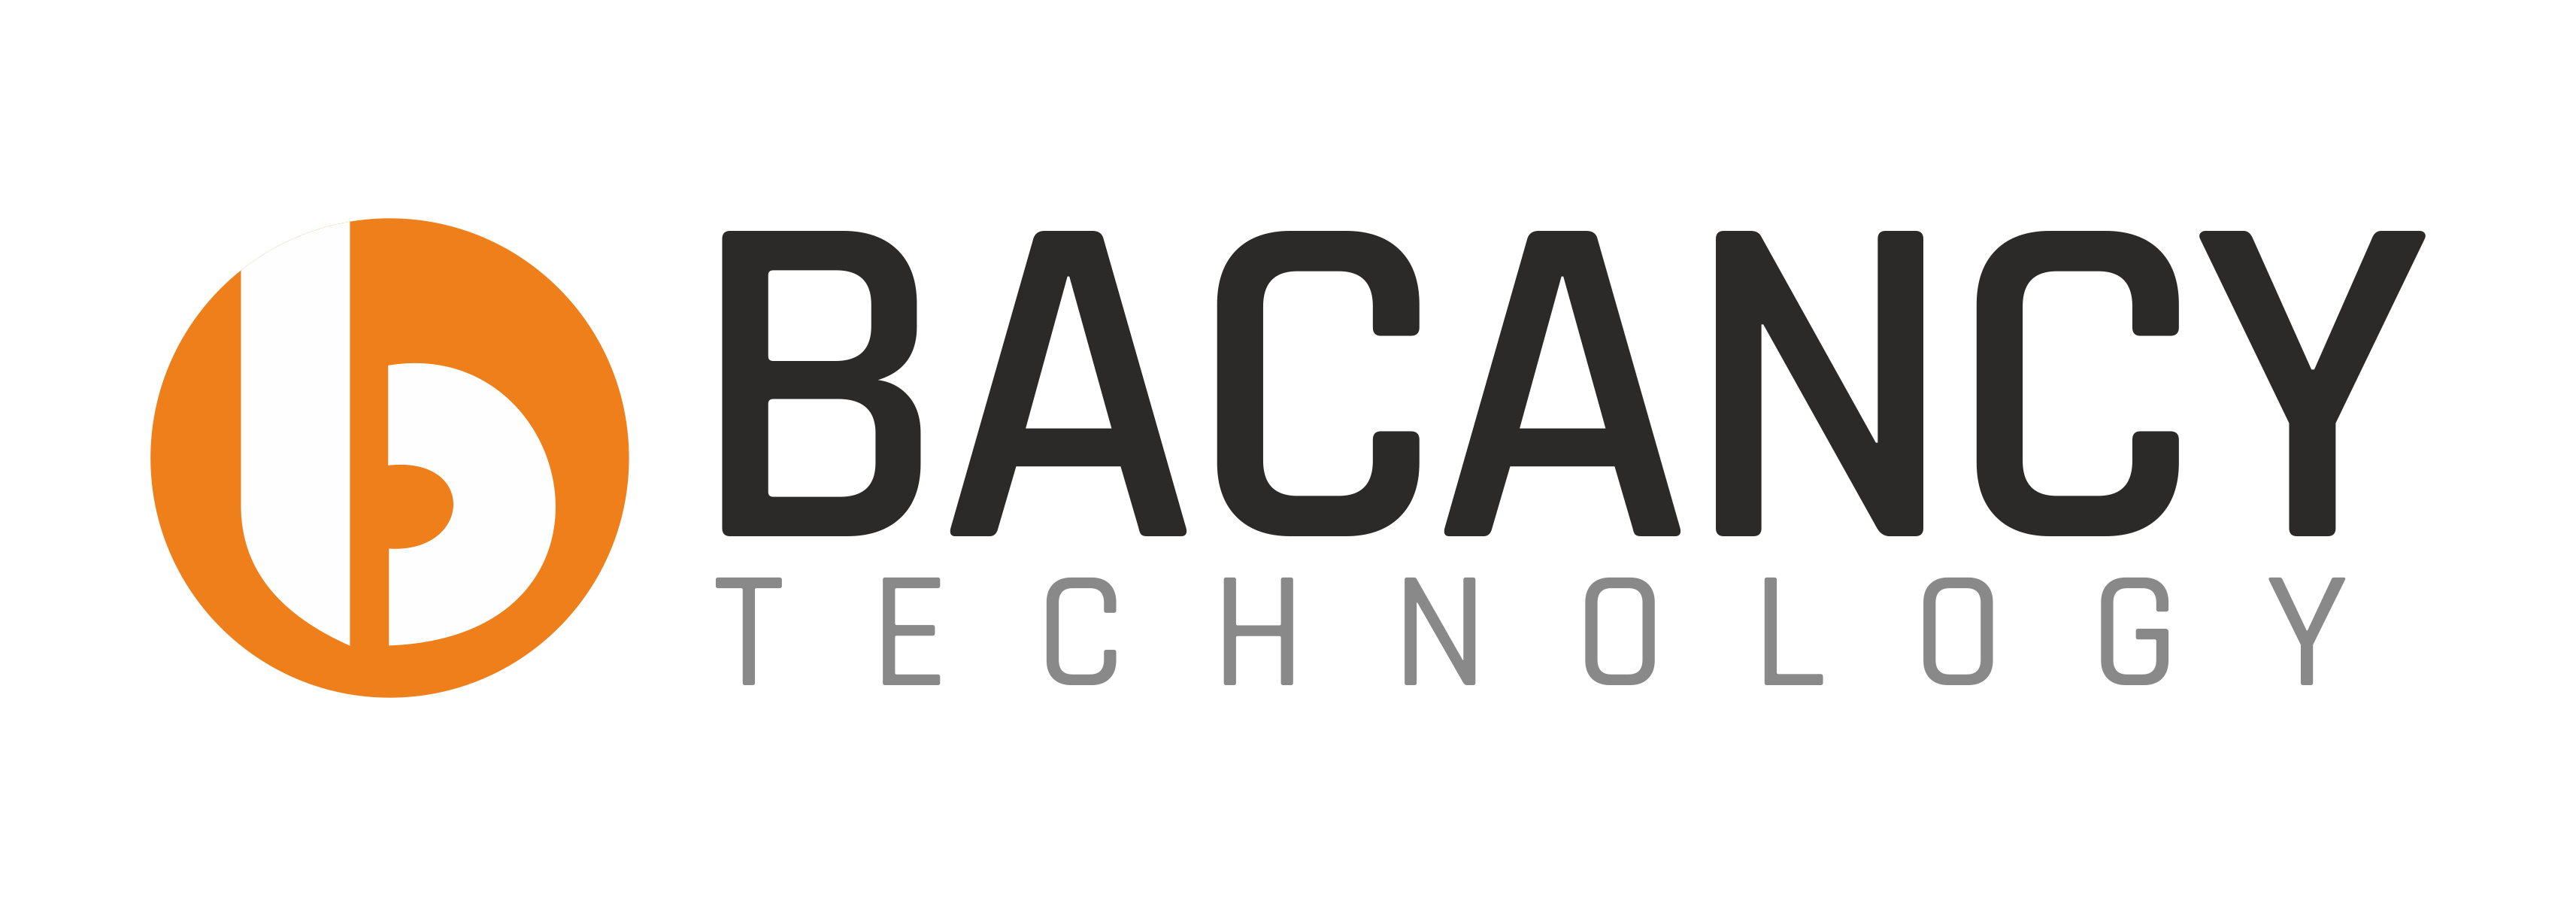 bacancy_technology.png